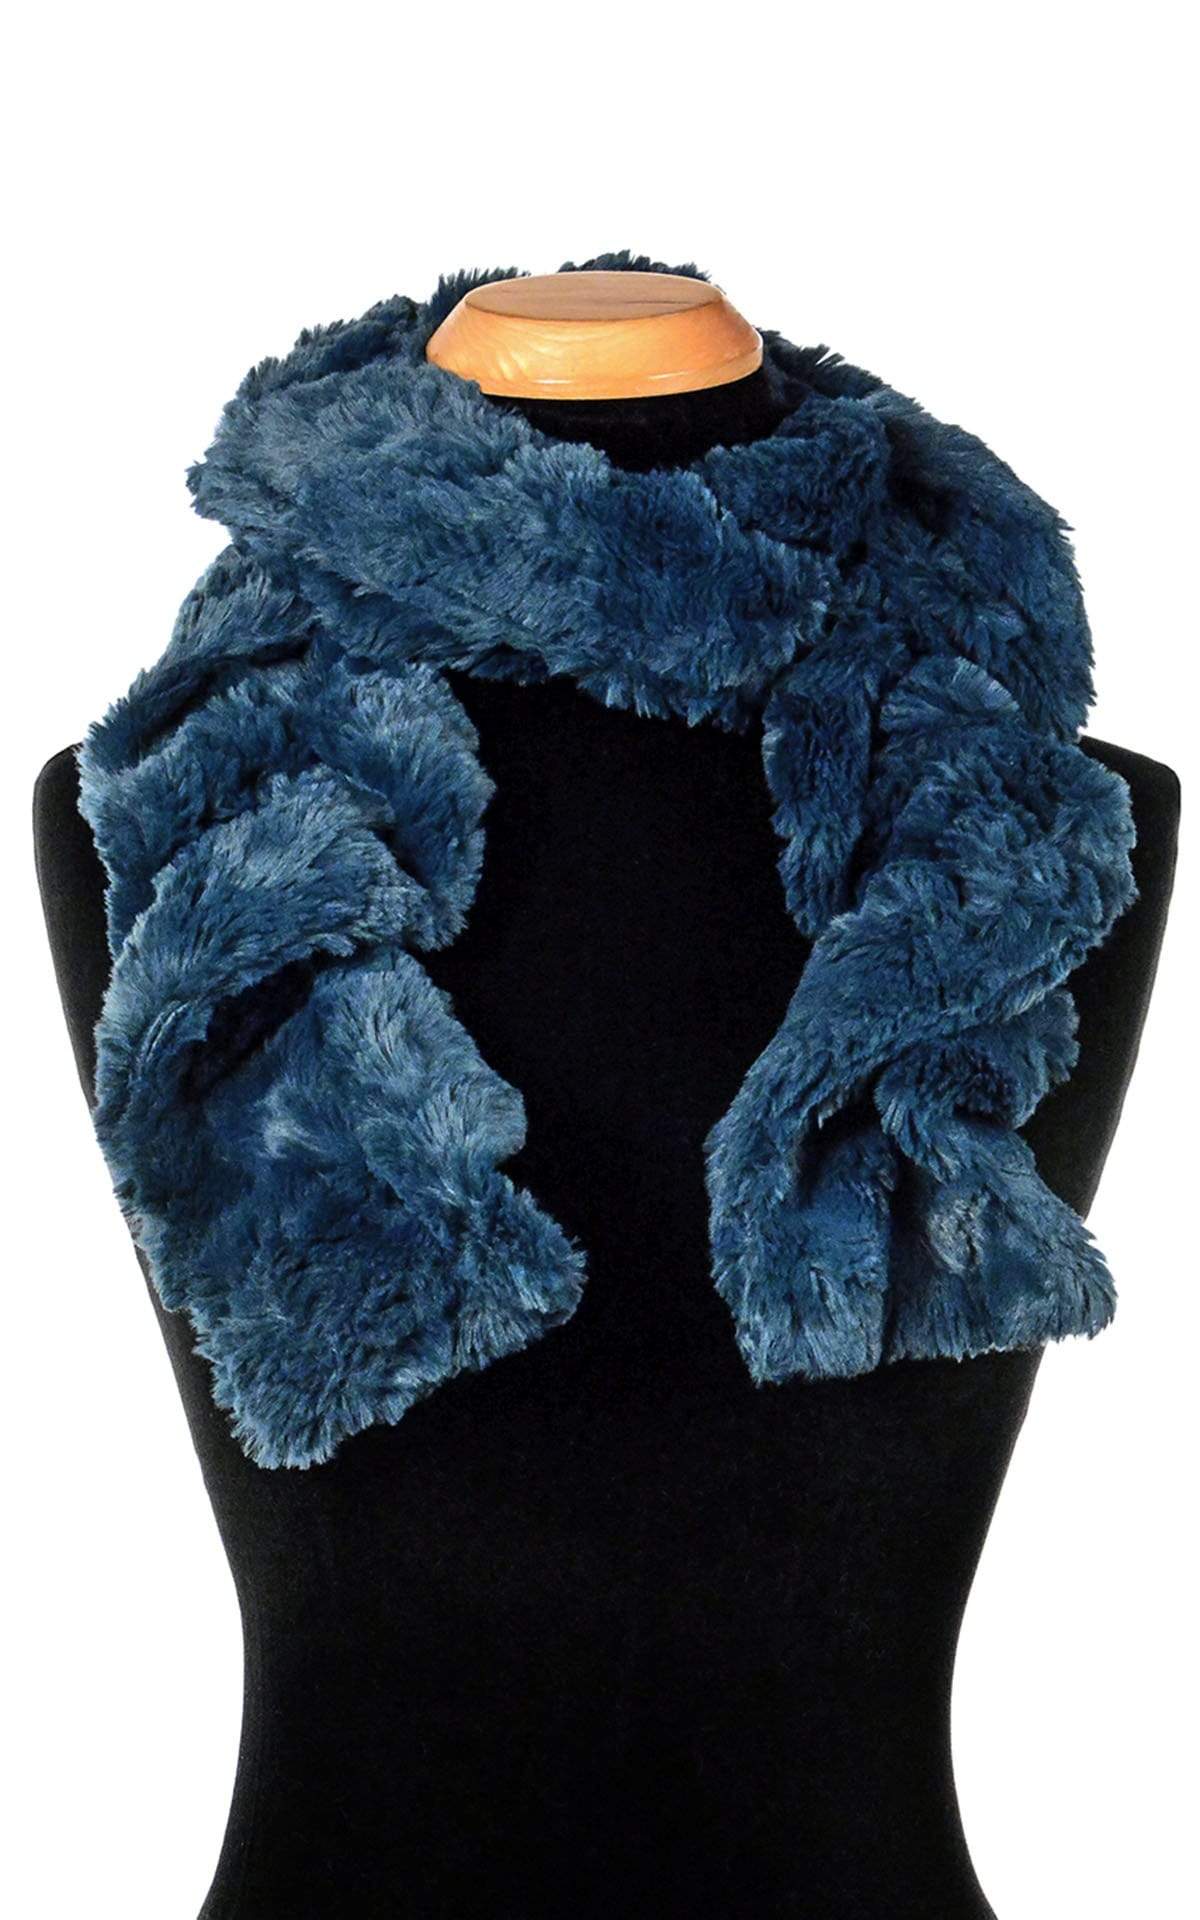 Product shot of Women’s Scrunchy Scarf | Peacock Pond Faux Fur, Blue / Teal | Handmade in Seattle WA | Pandemonium Millinery